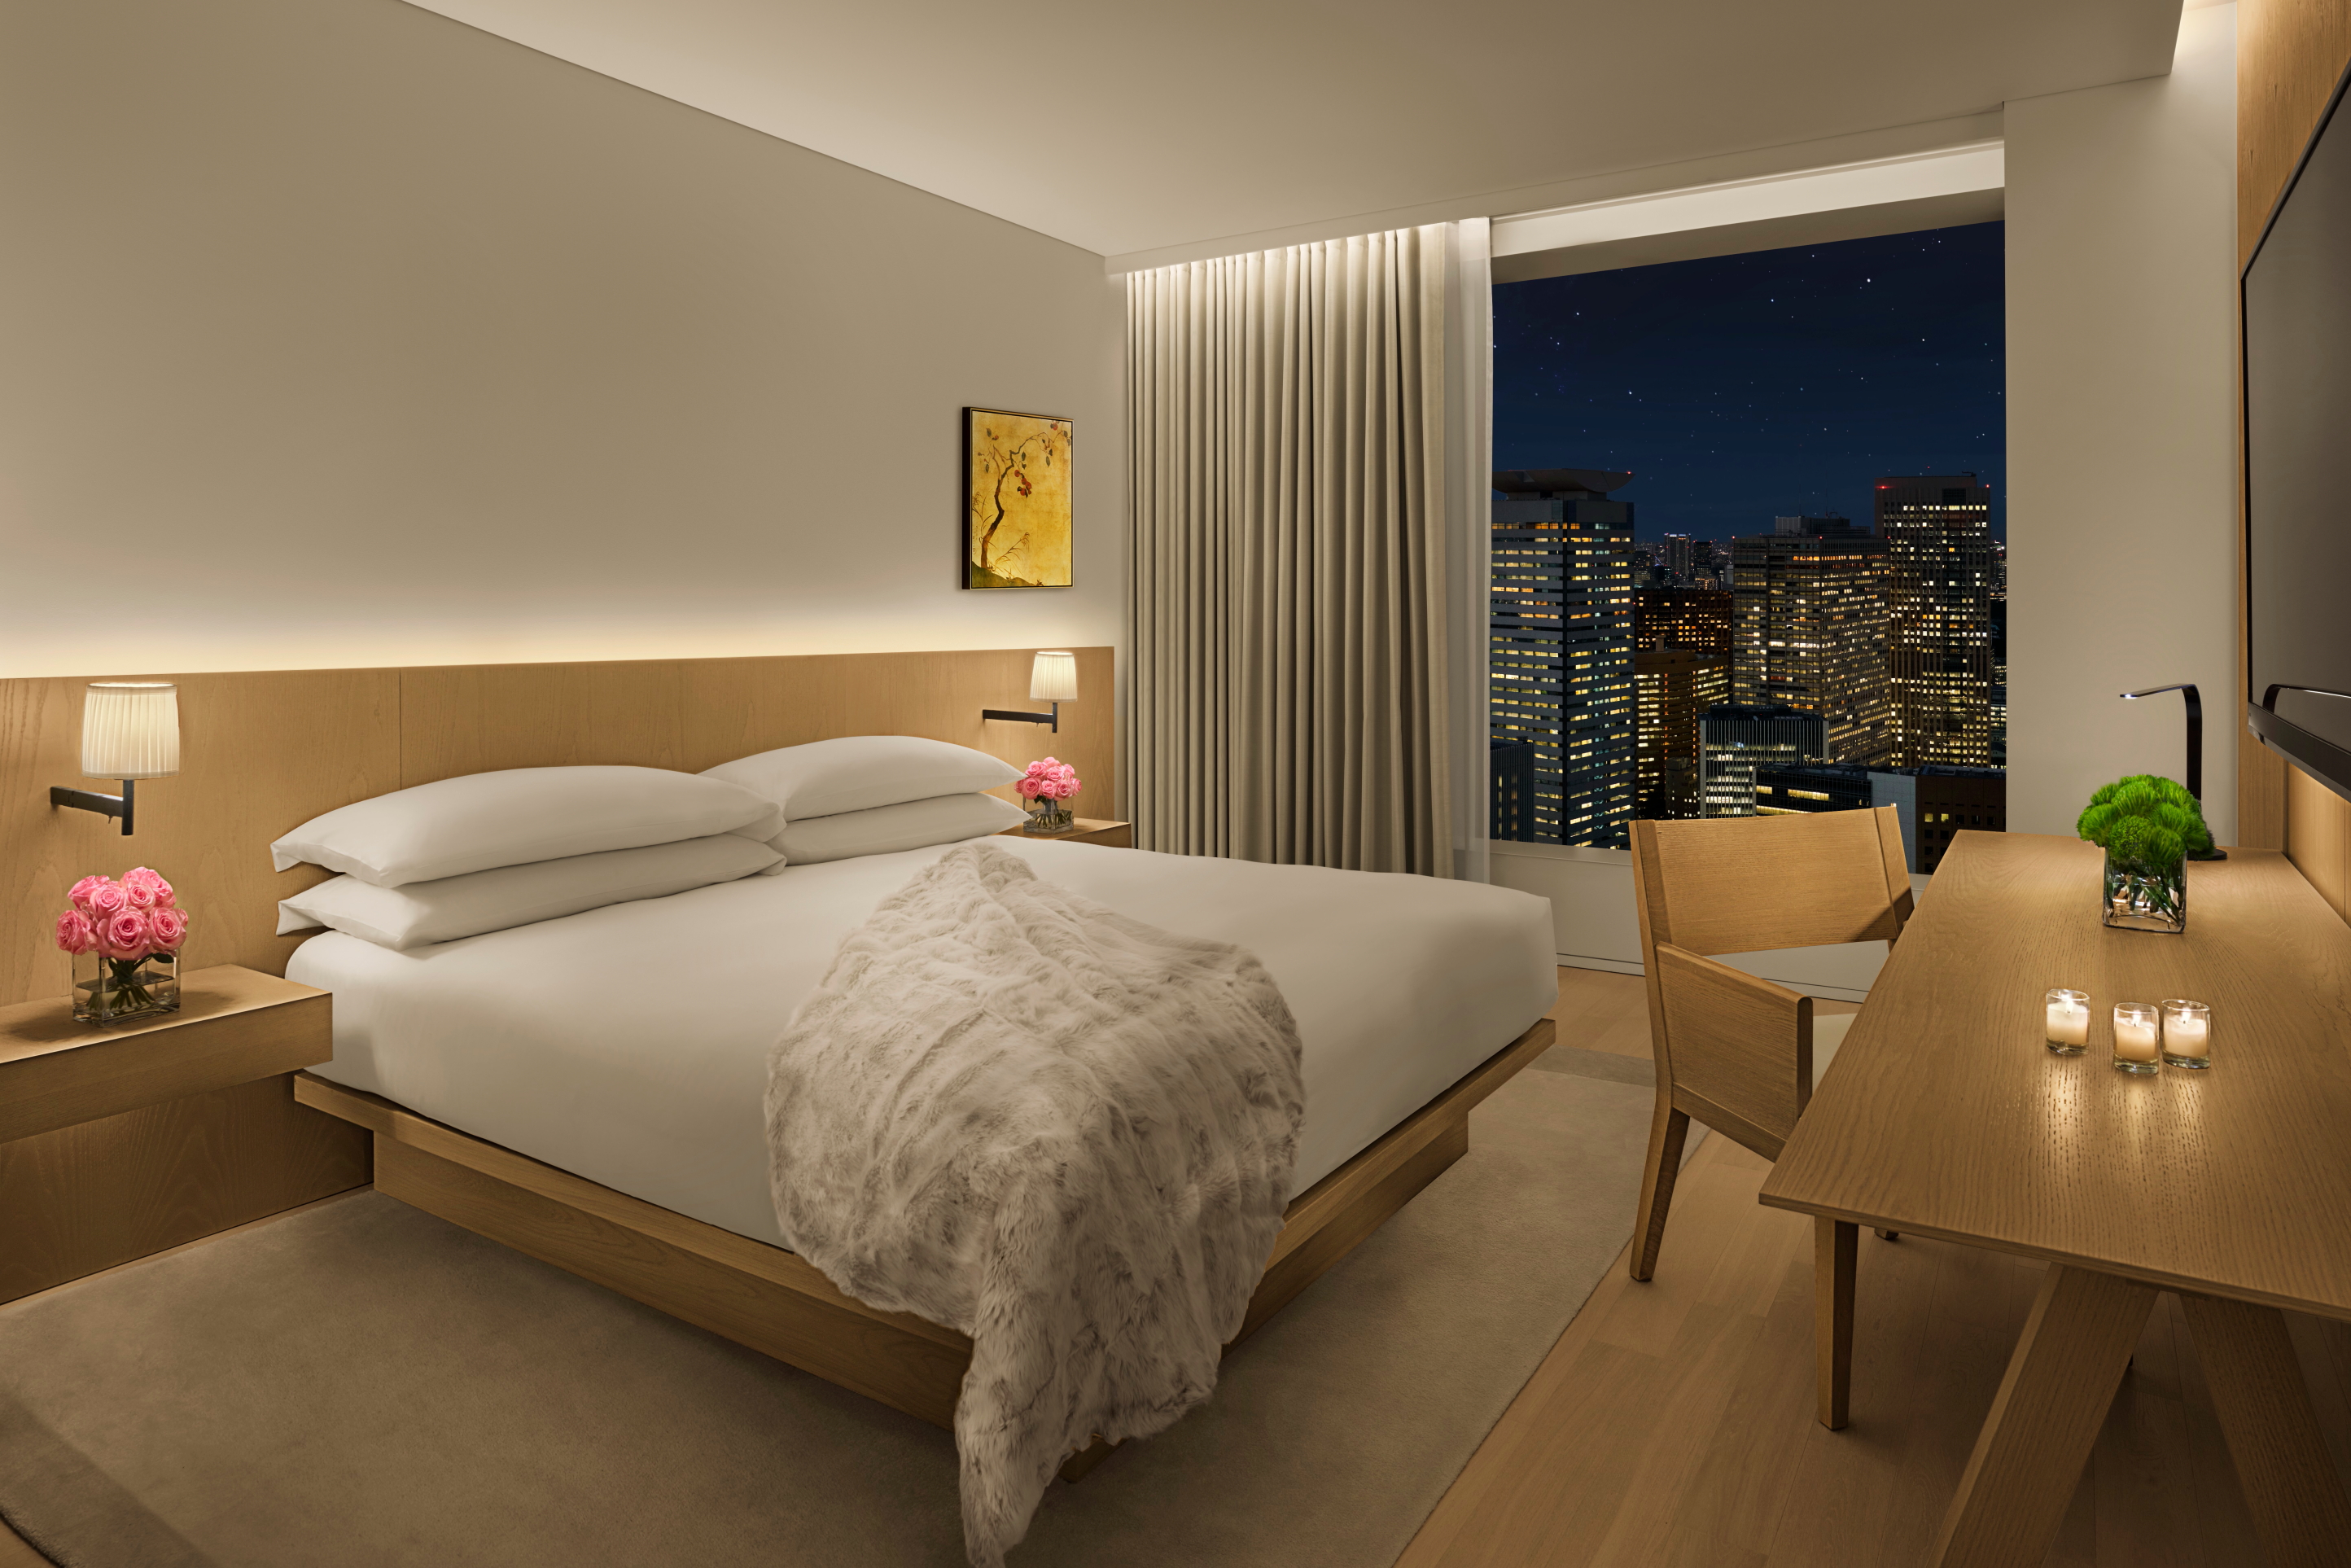 Marriott expanded its Edition brand of hotels to Japan on 20 October, with the opening of the Tokyo Edition, Toranomon. Read more: https://www.asiatraveltips.com/news20/1510-TokyoEdition.shtml Click to enlarge.